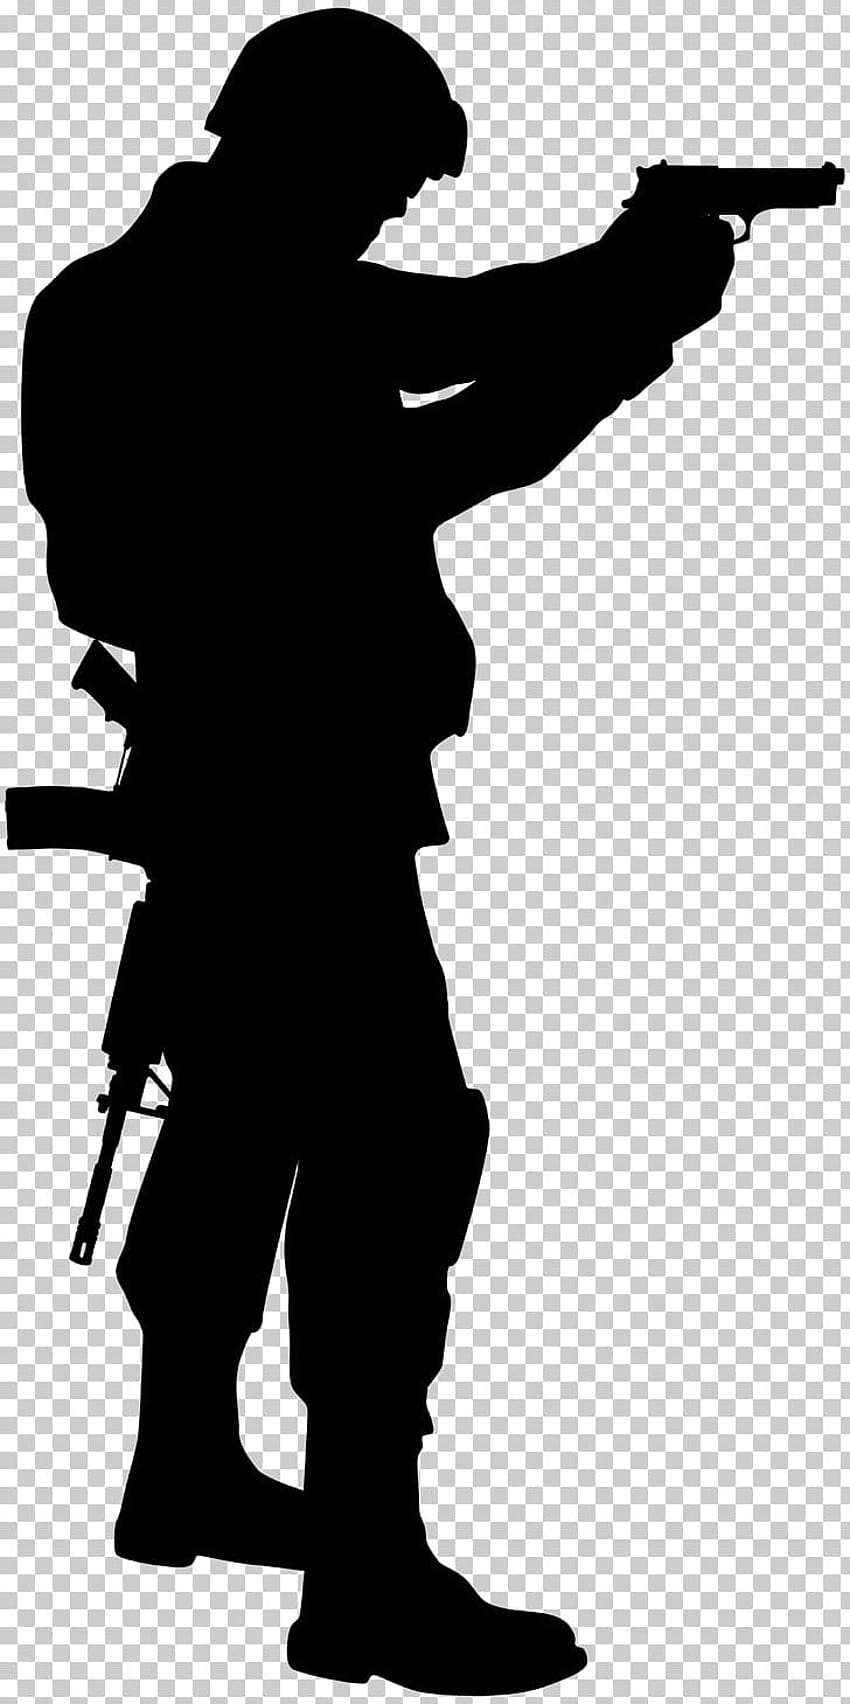 Soldier Silhouette PNG, Clipart, Army, Black And White, Clipart, Clip Art, PNG HD phone wallpaper